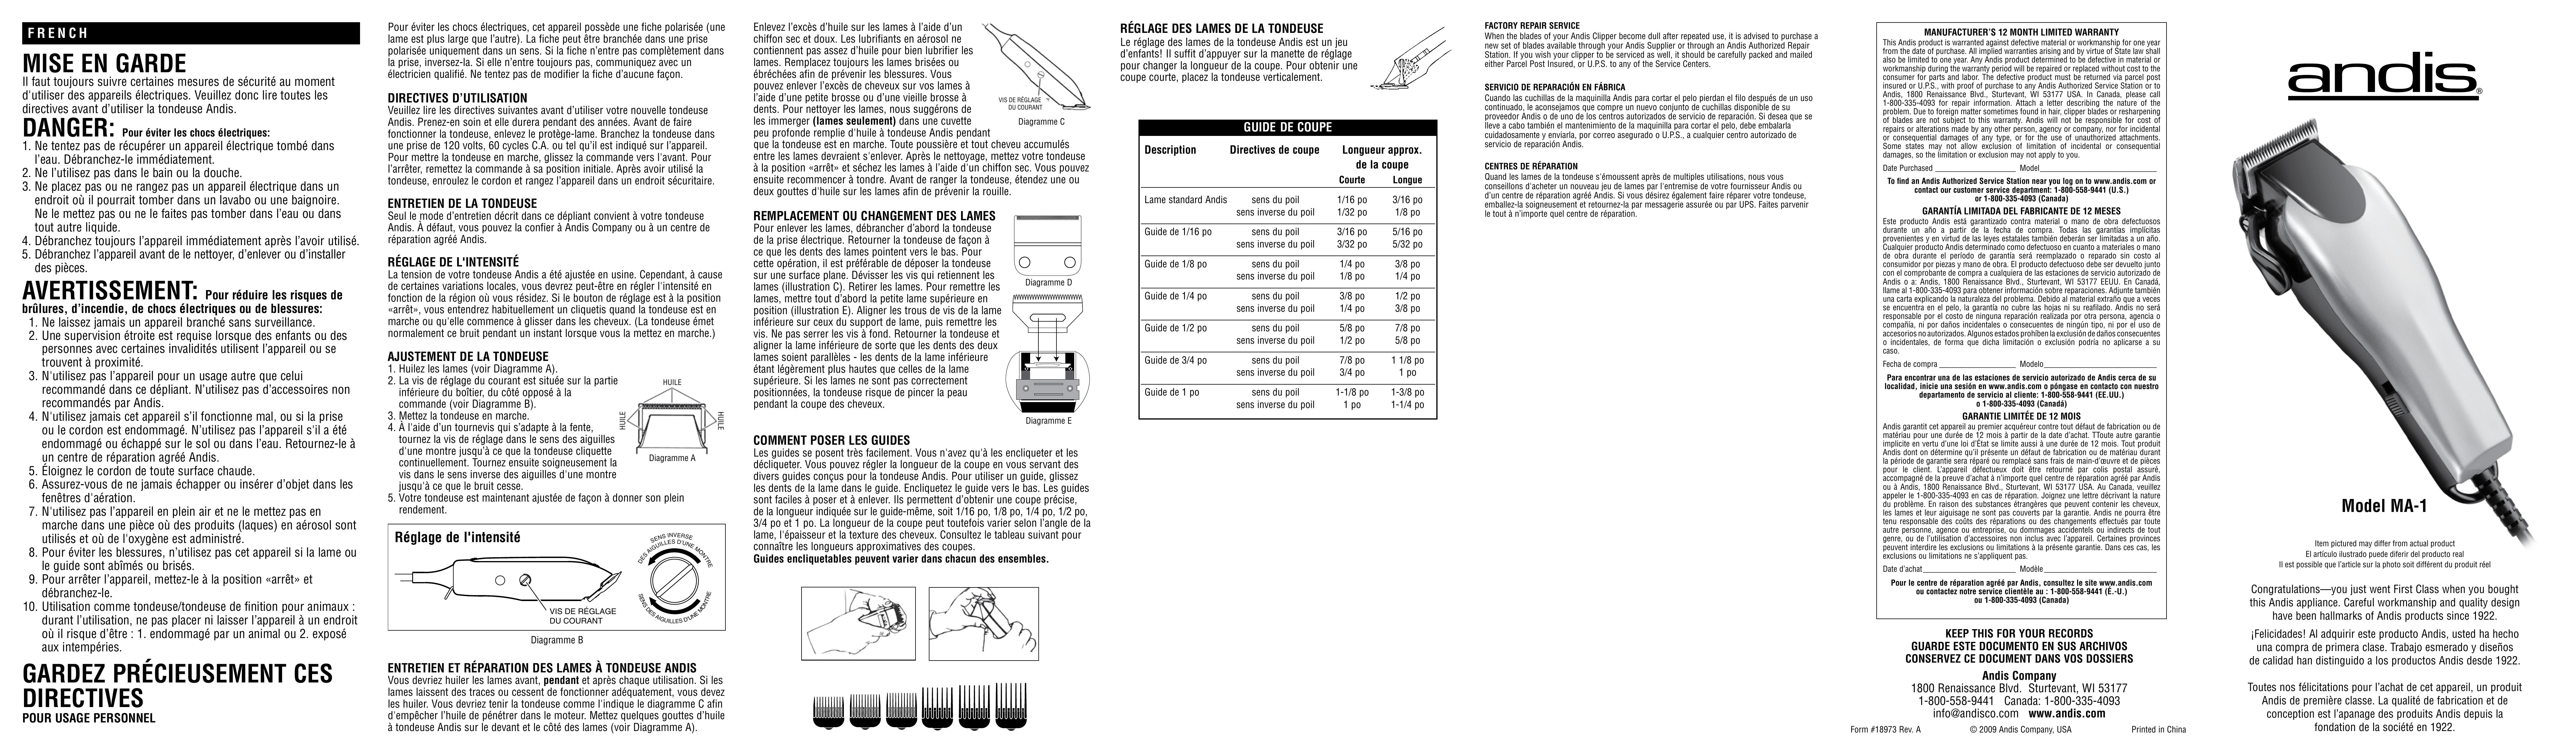 Andis Company MA-1 Hair Clippers User Manual